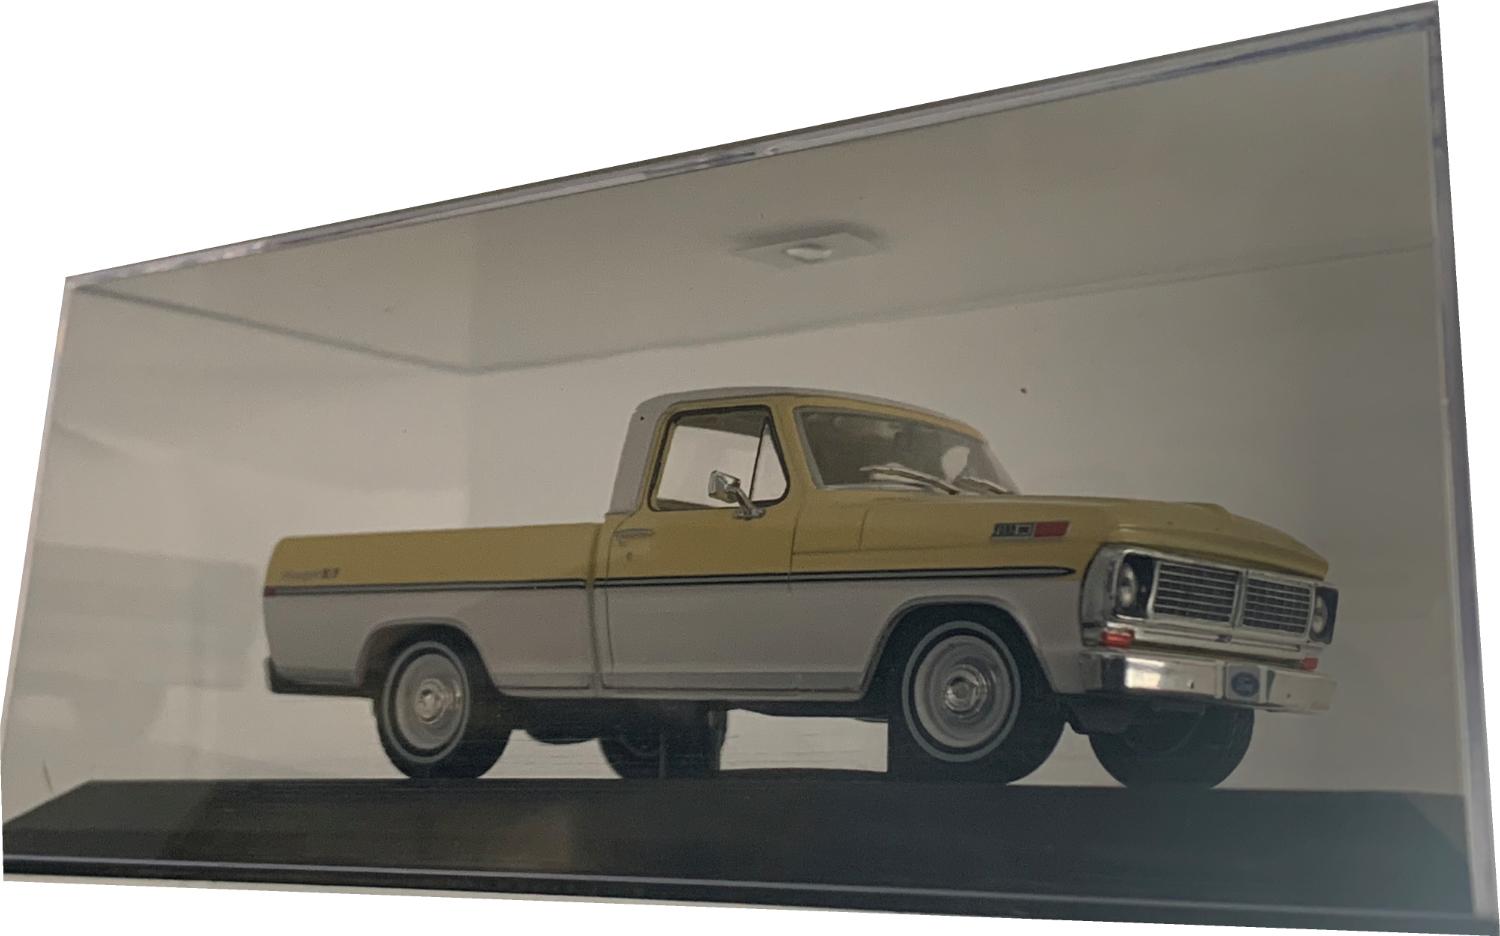 An excellent scale model of the Ford F-100 with high level of detail throughout, all authentically recreated.  Model is mounted on a removable plinth with a removable hard plastic cover.